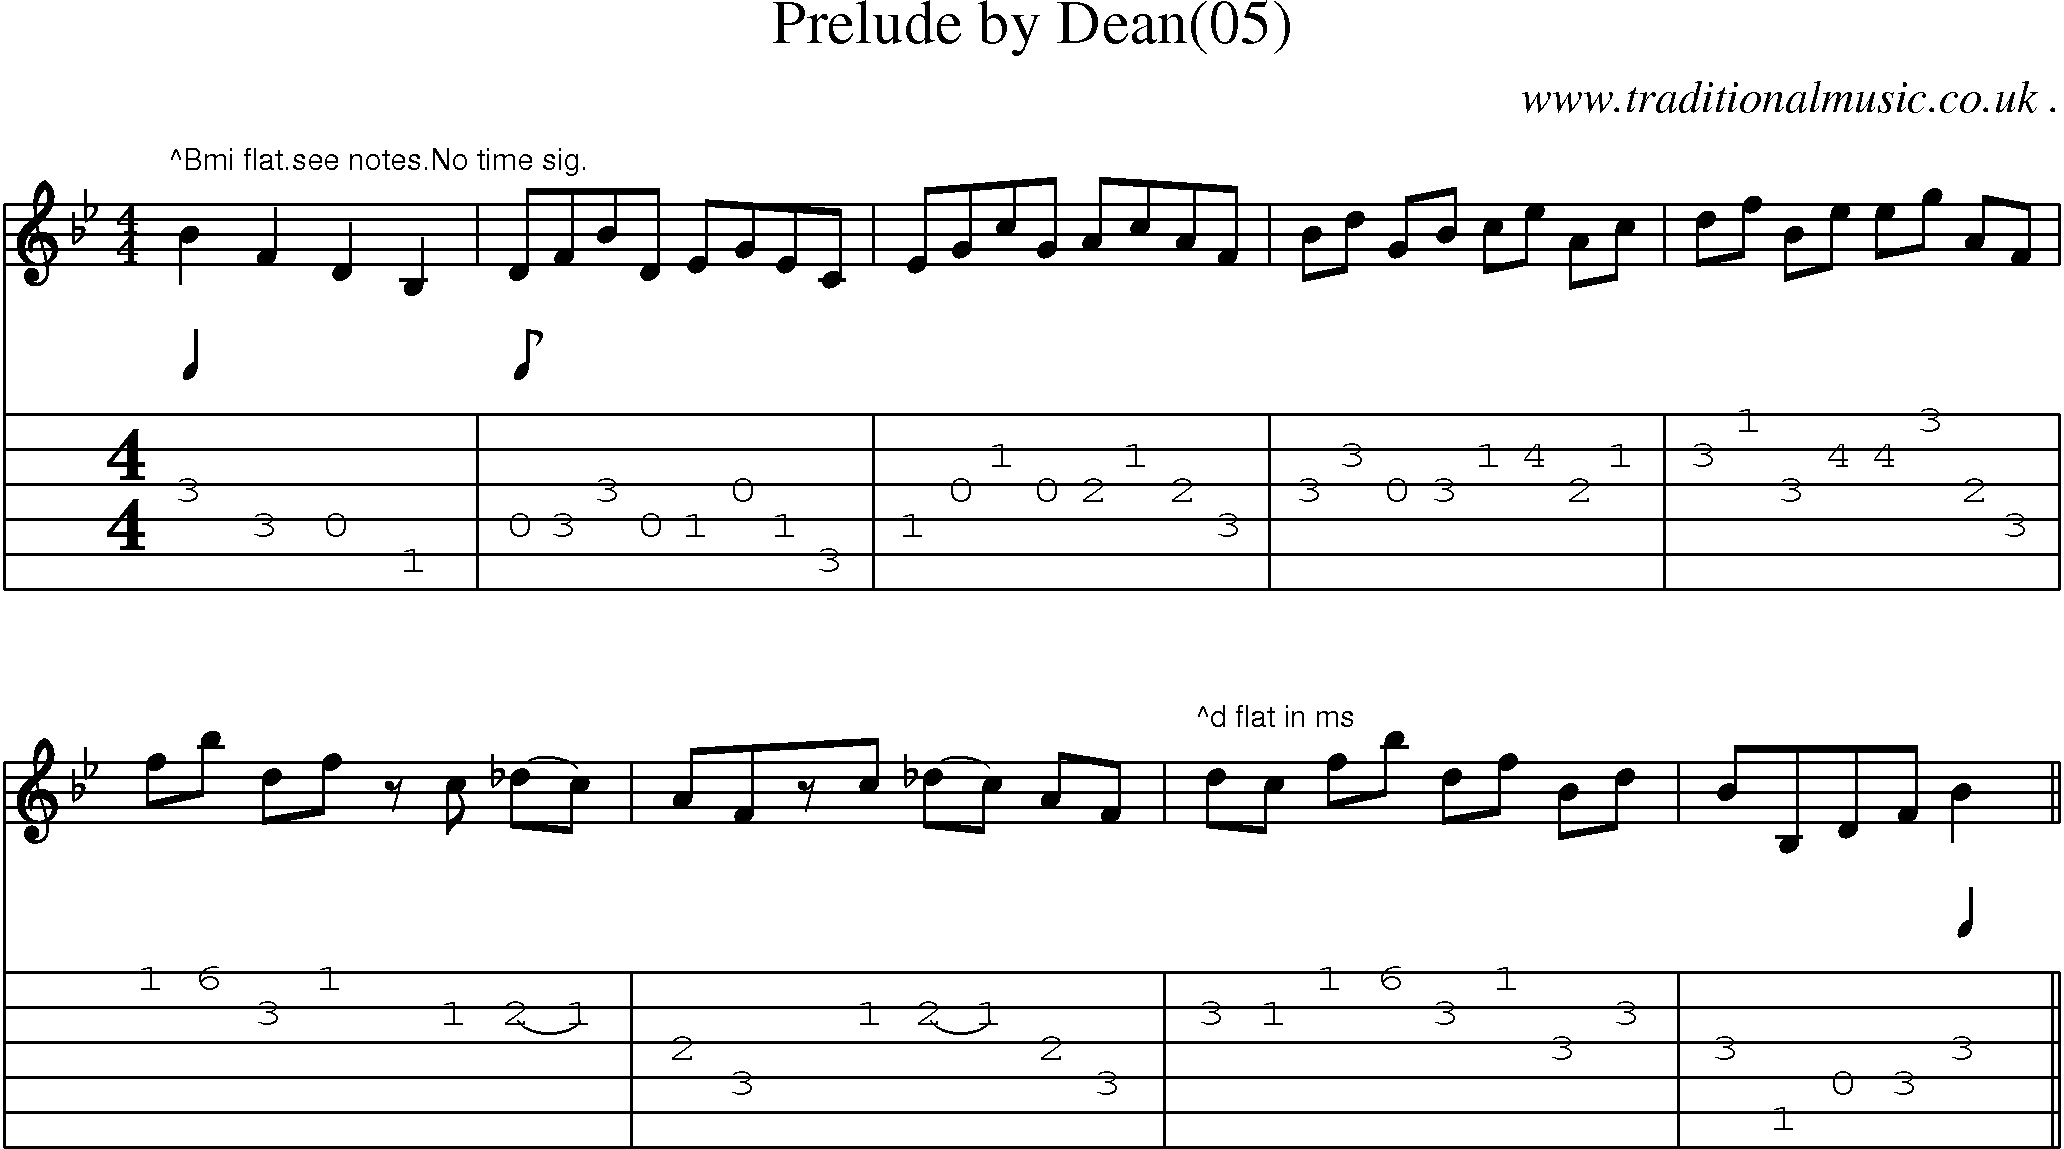 Sheet-Music and Guitar Tabs for Prelude By Dean(05)